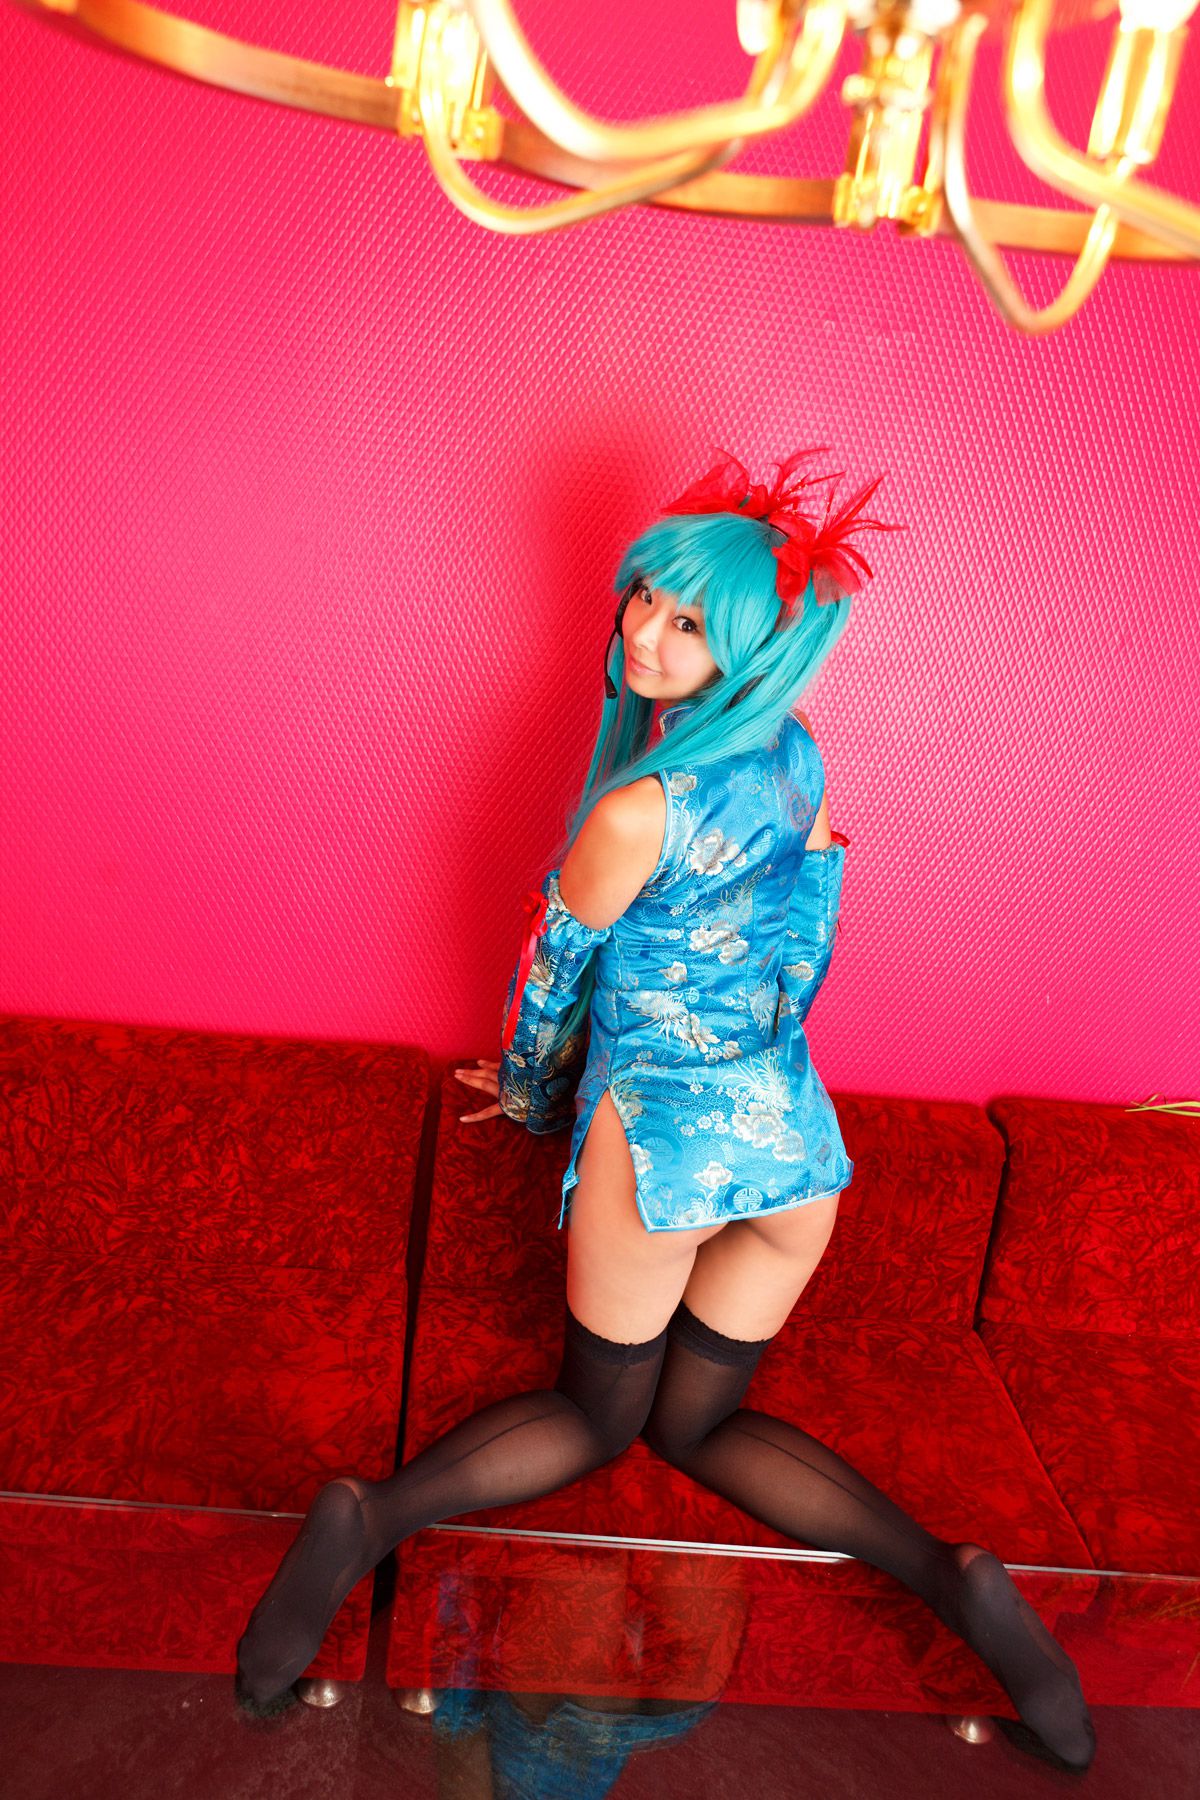 taotuhome[Cosplay] Necoco as Hatsune Miku from Vocaloid 套图第61张